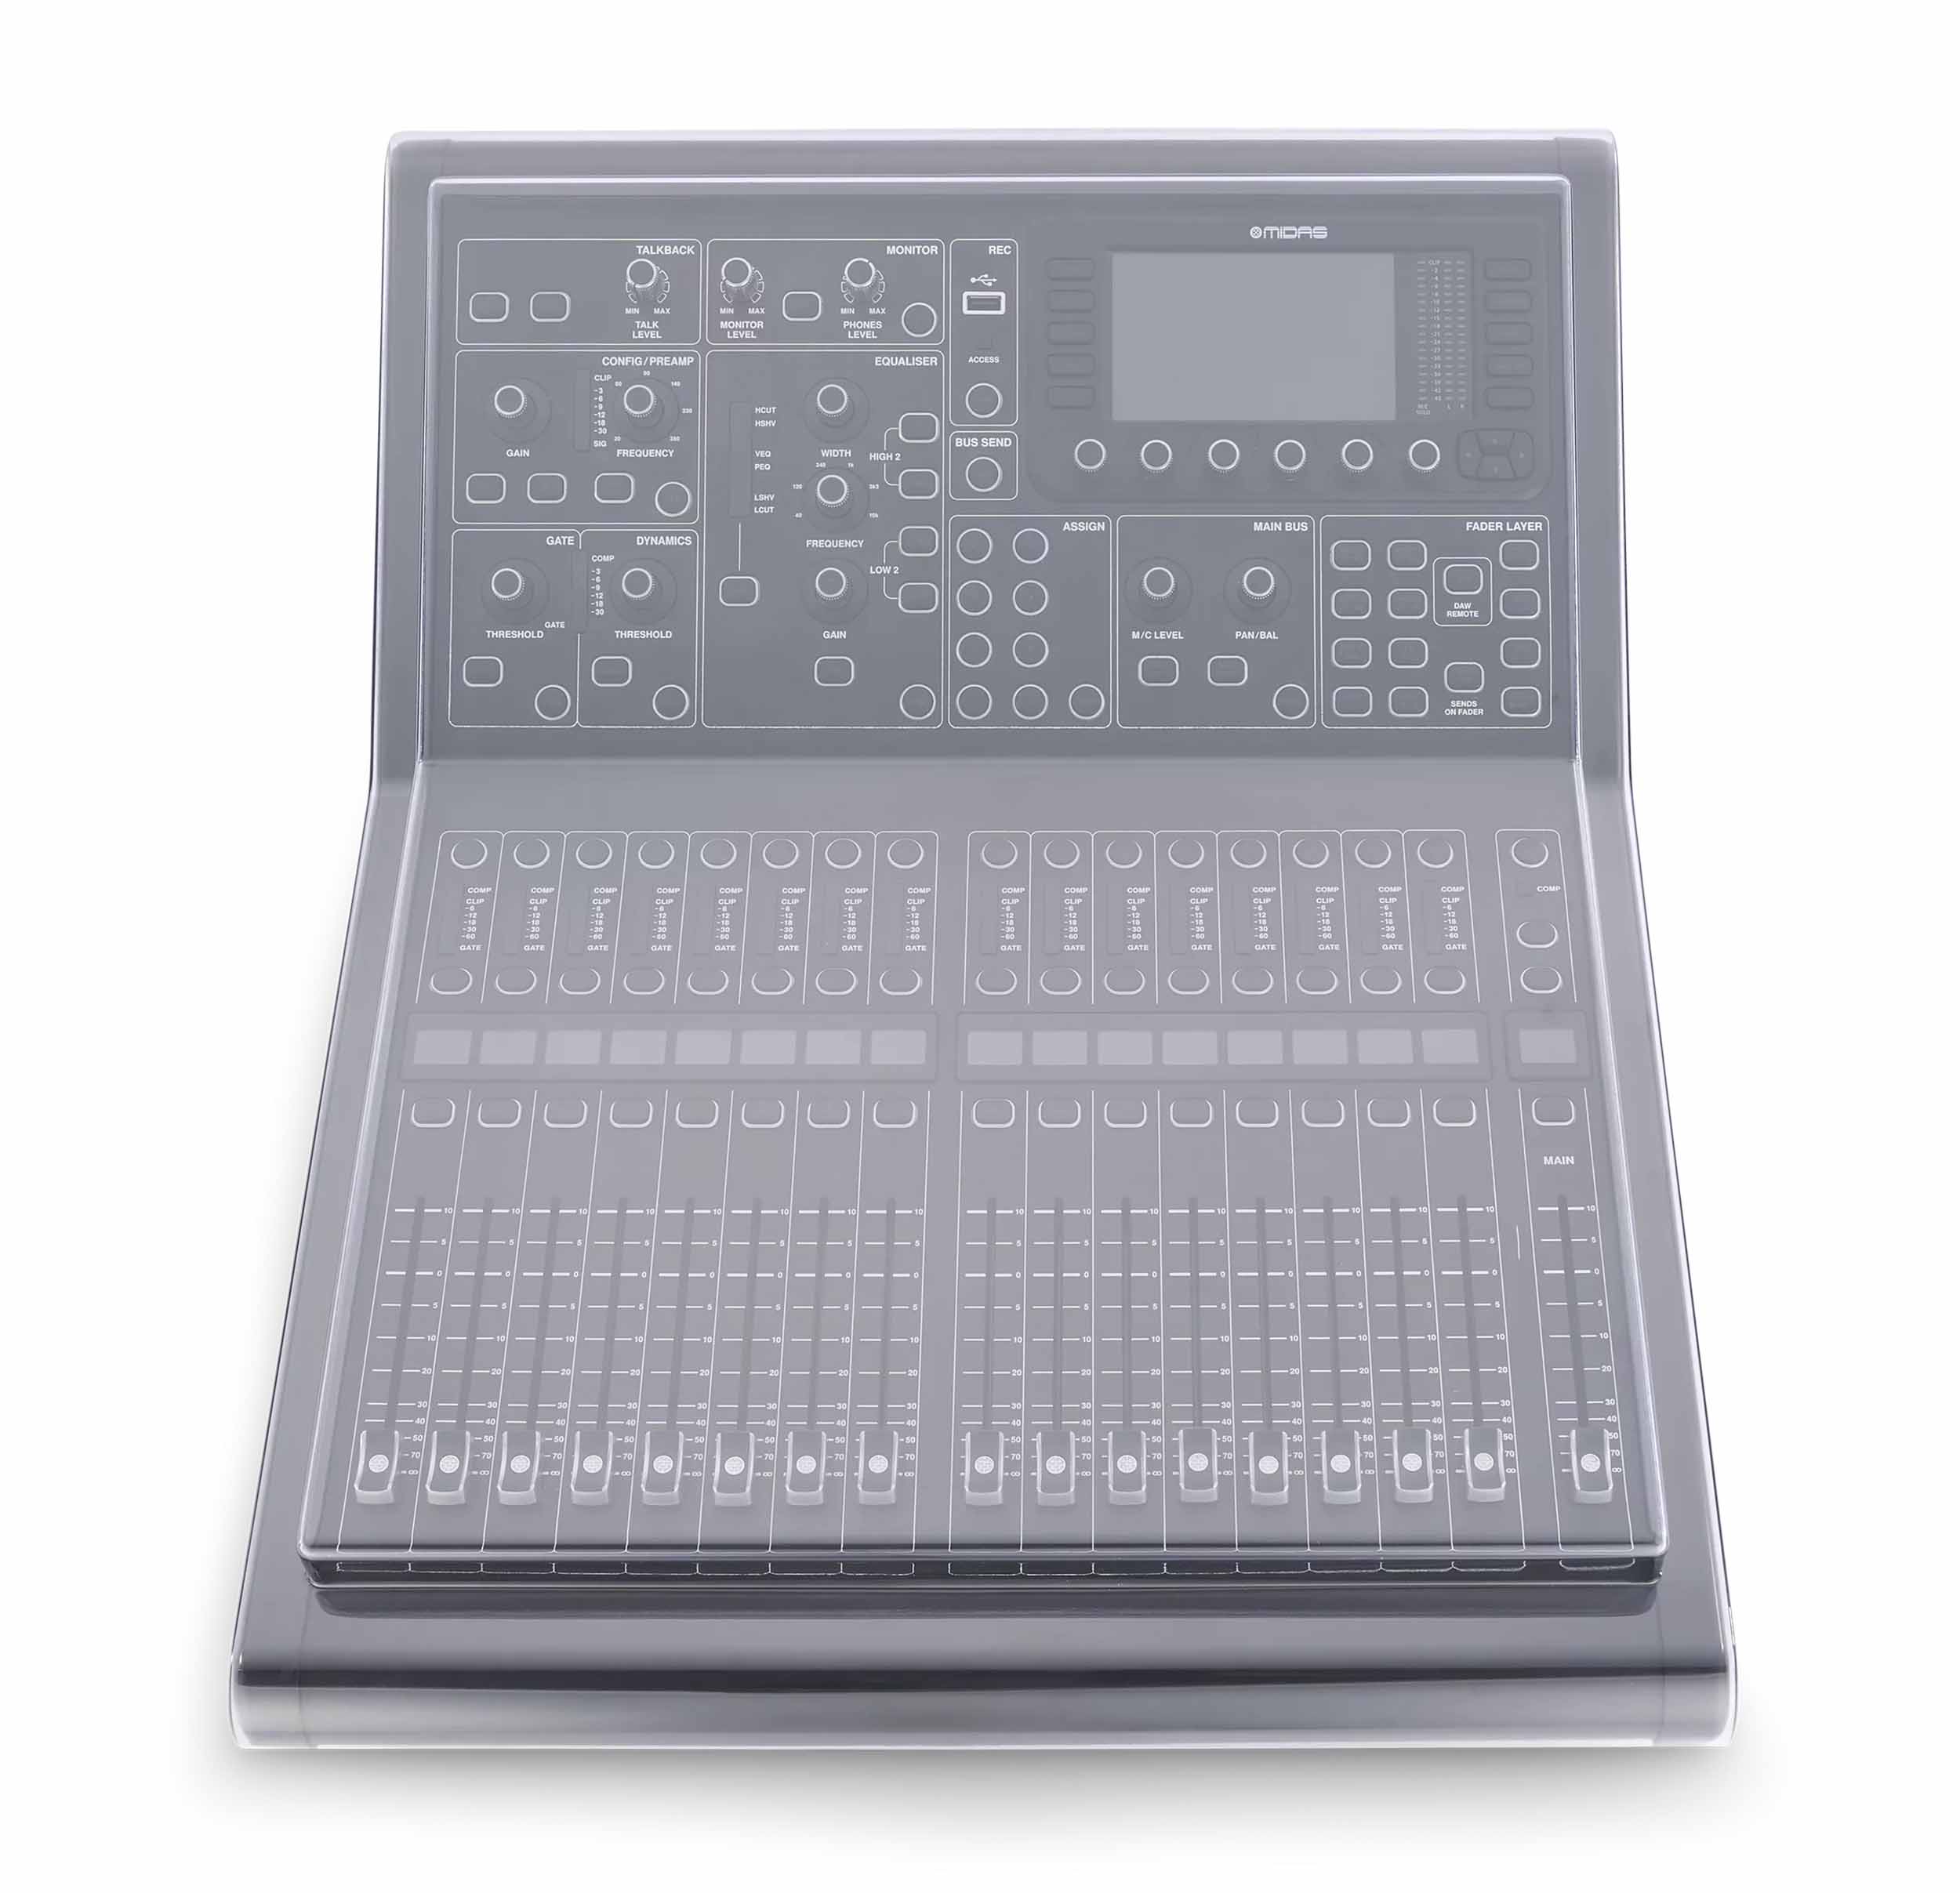 Decksaver DS-PC-M32R, Protection Cover for M32R and M32R Live Digital Mixers by DECKSAVER